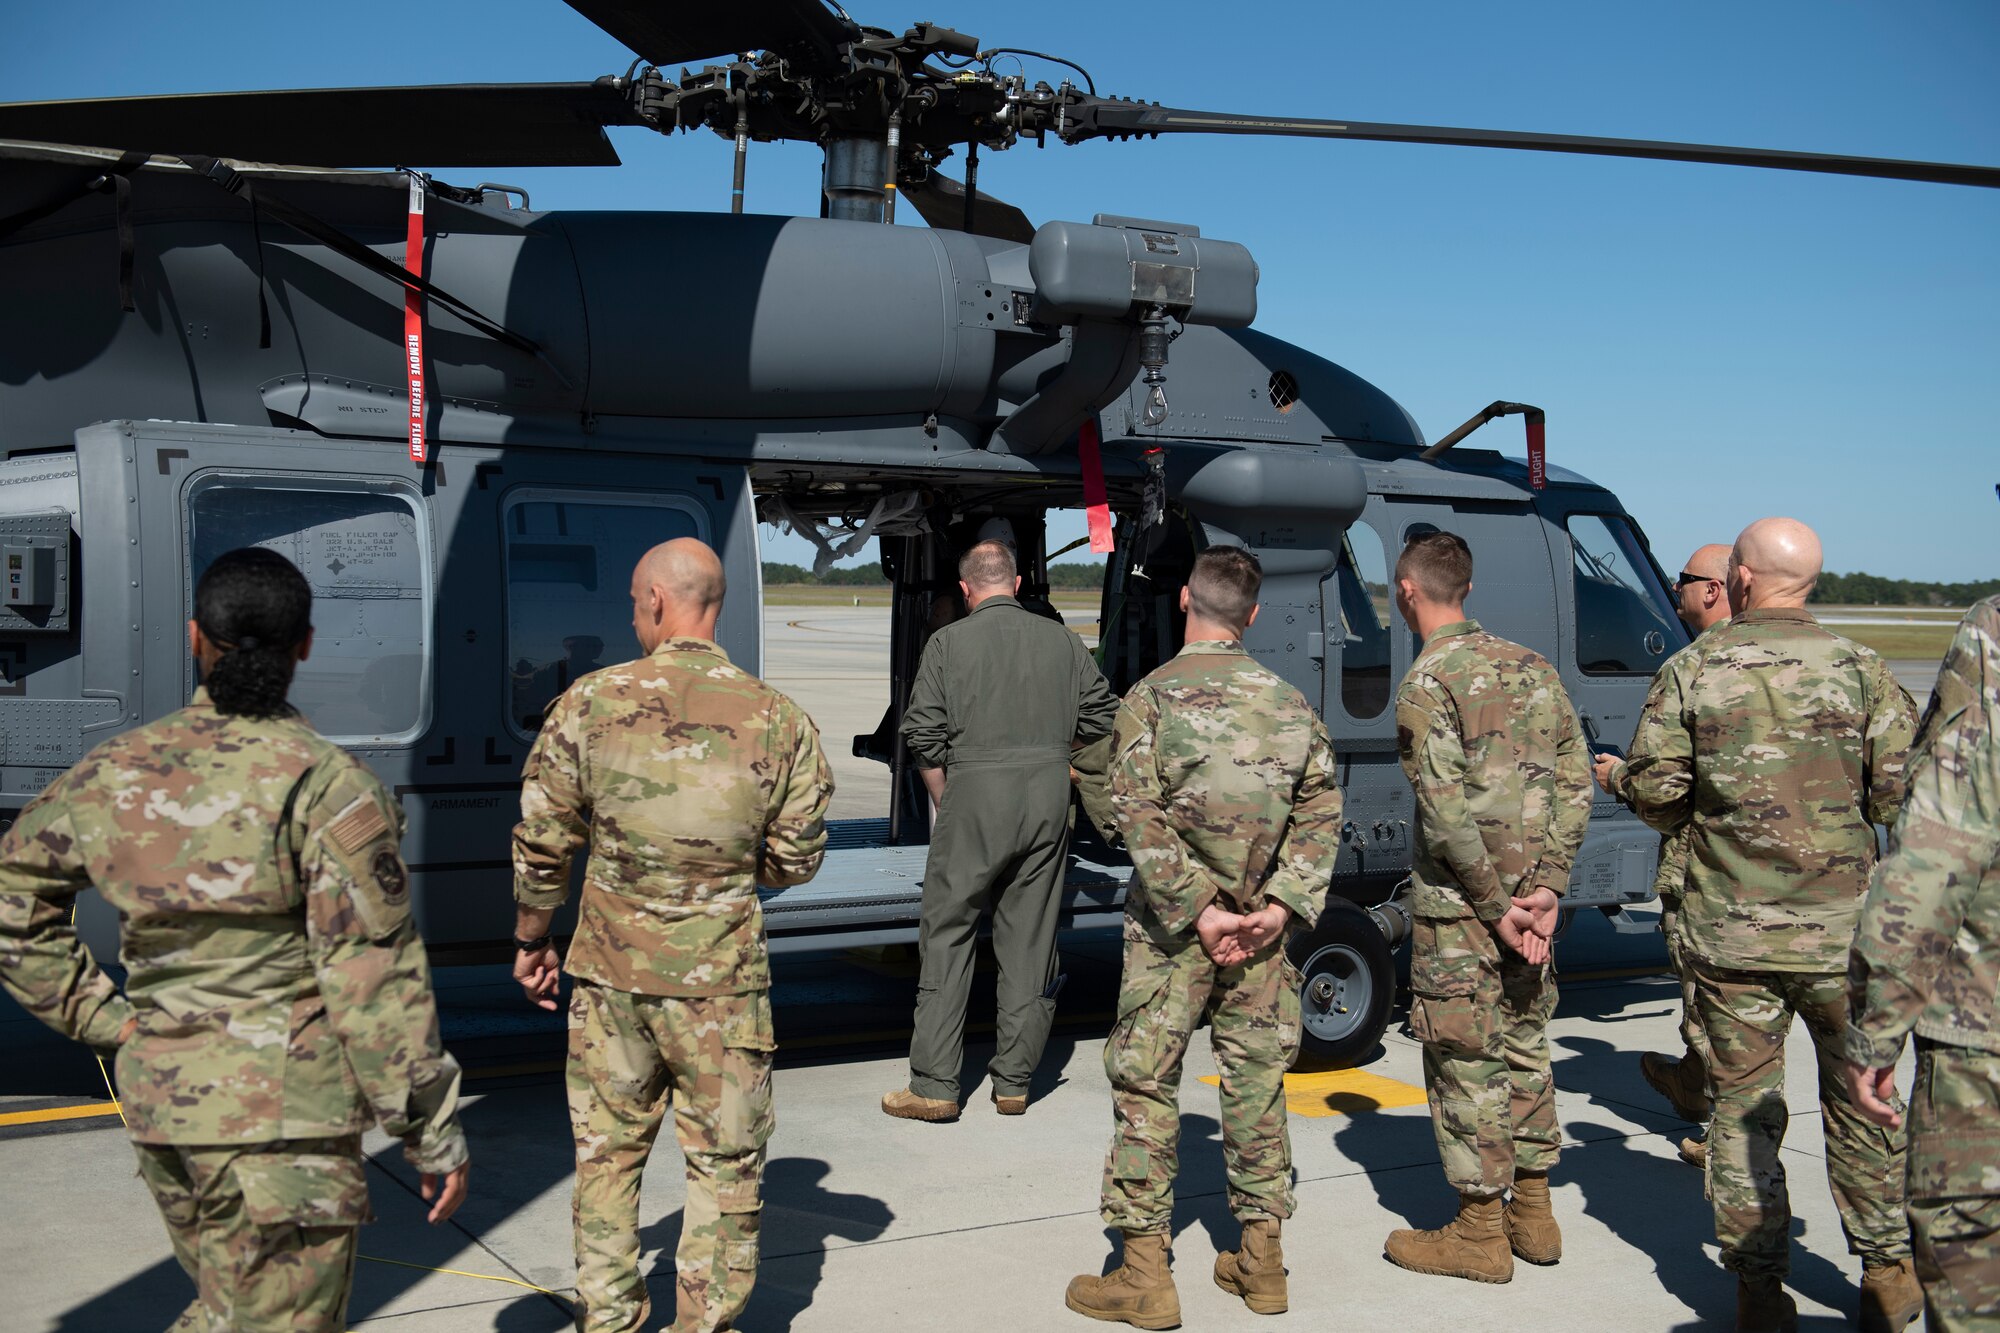 A photo of a group of men standing beside and looking at an HH-60W.